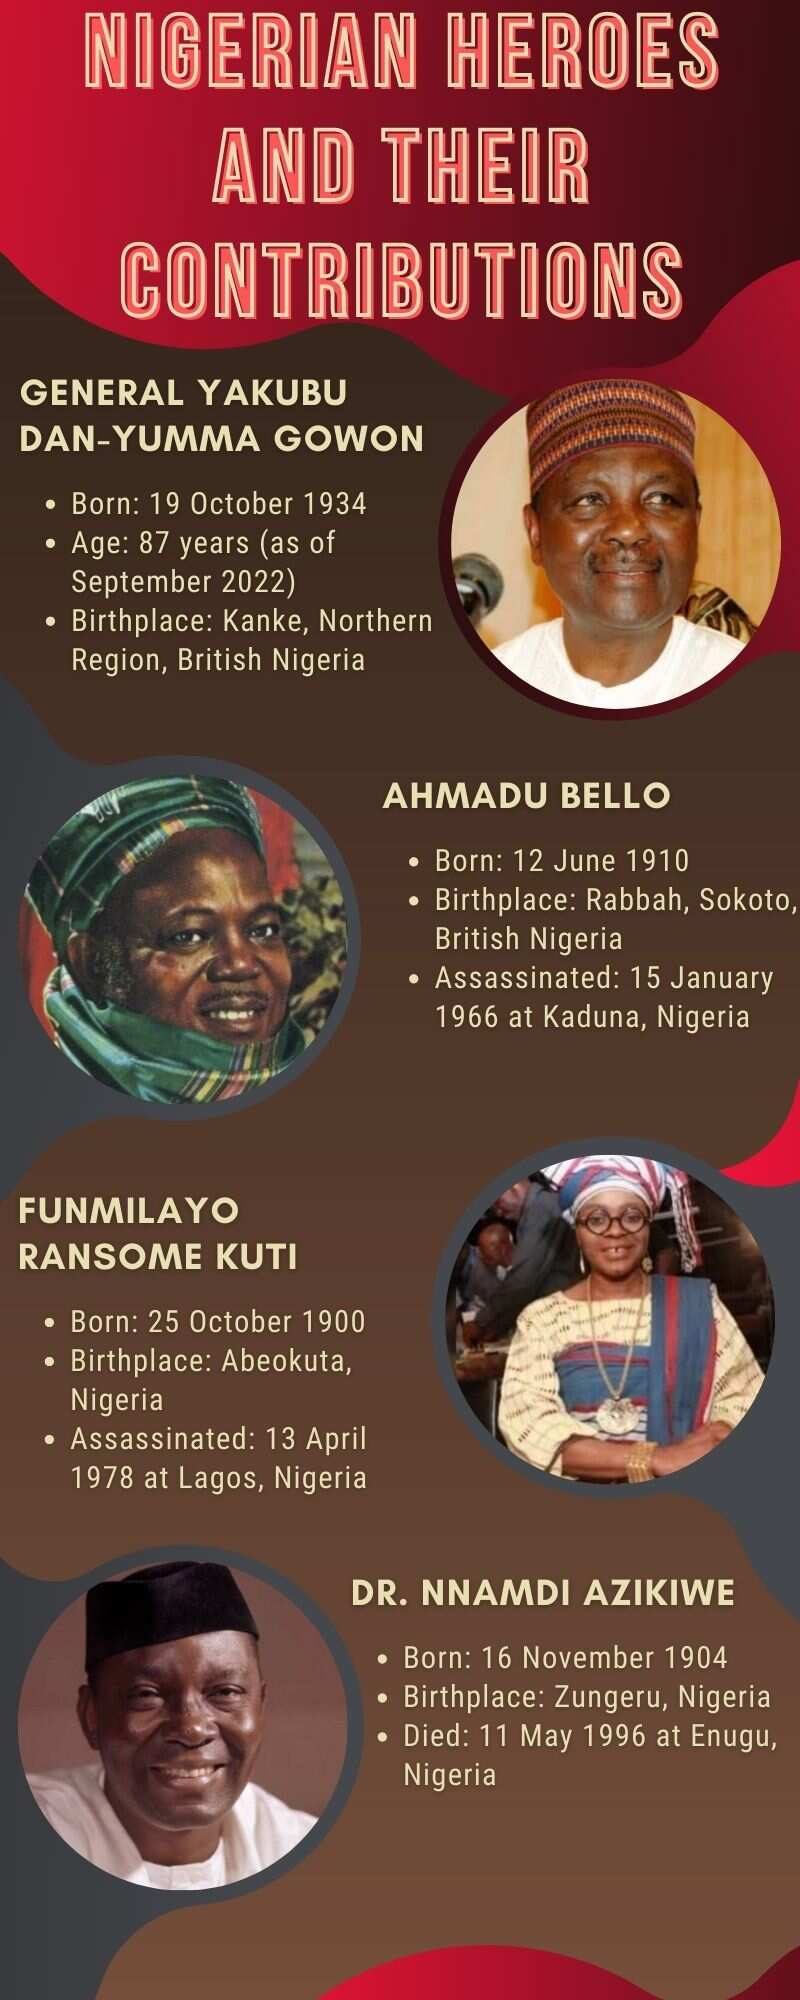 Nigerian heroes and their contributions